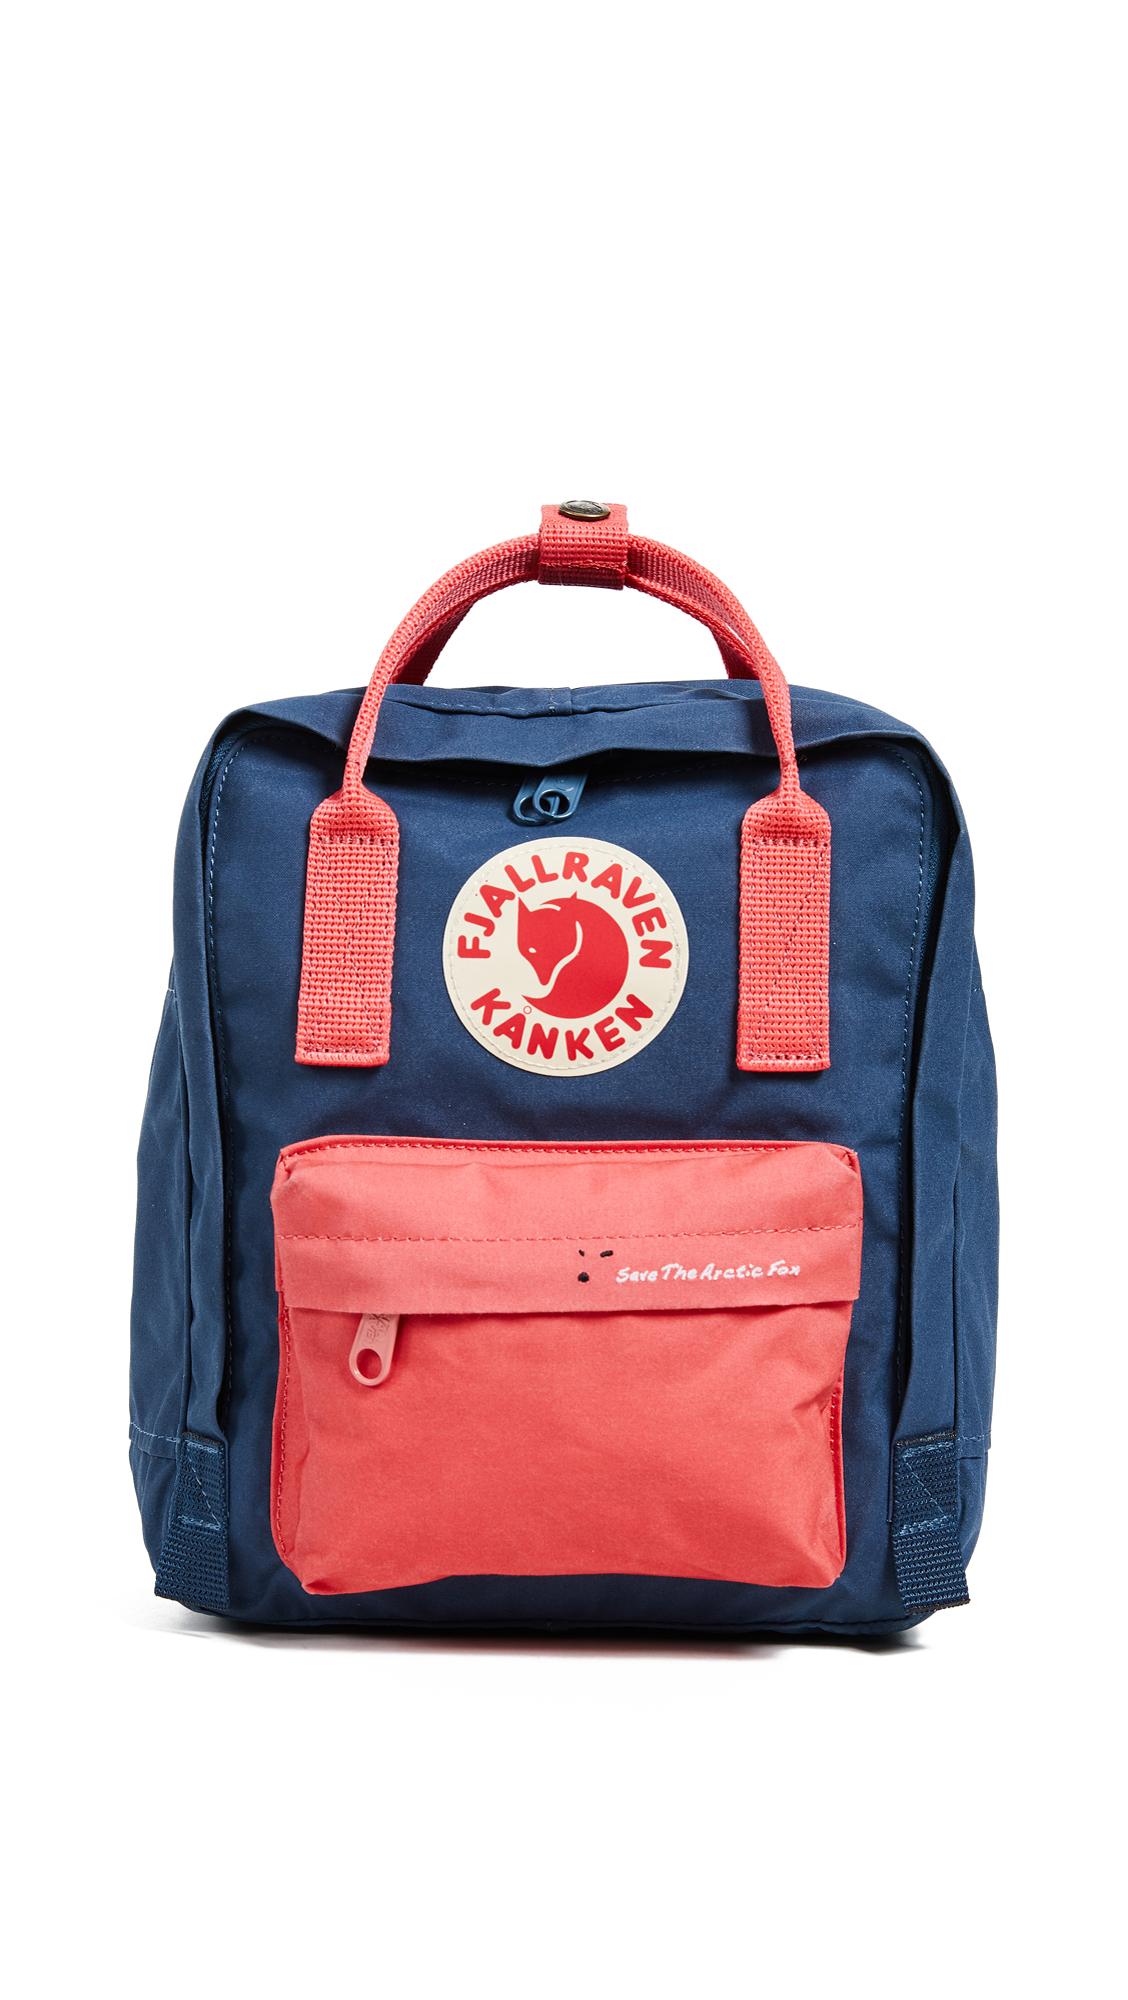 Fjall Raven Save The Arctic Fox Kanken Mini Backpack In Royal Blue/peach Pink